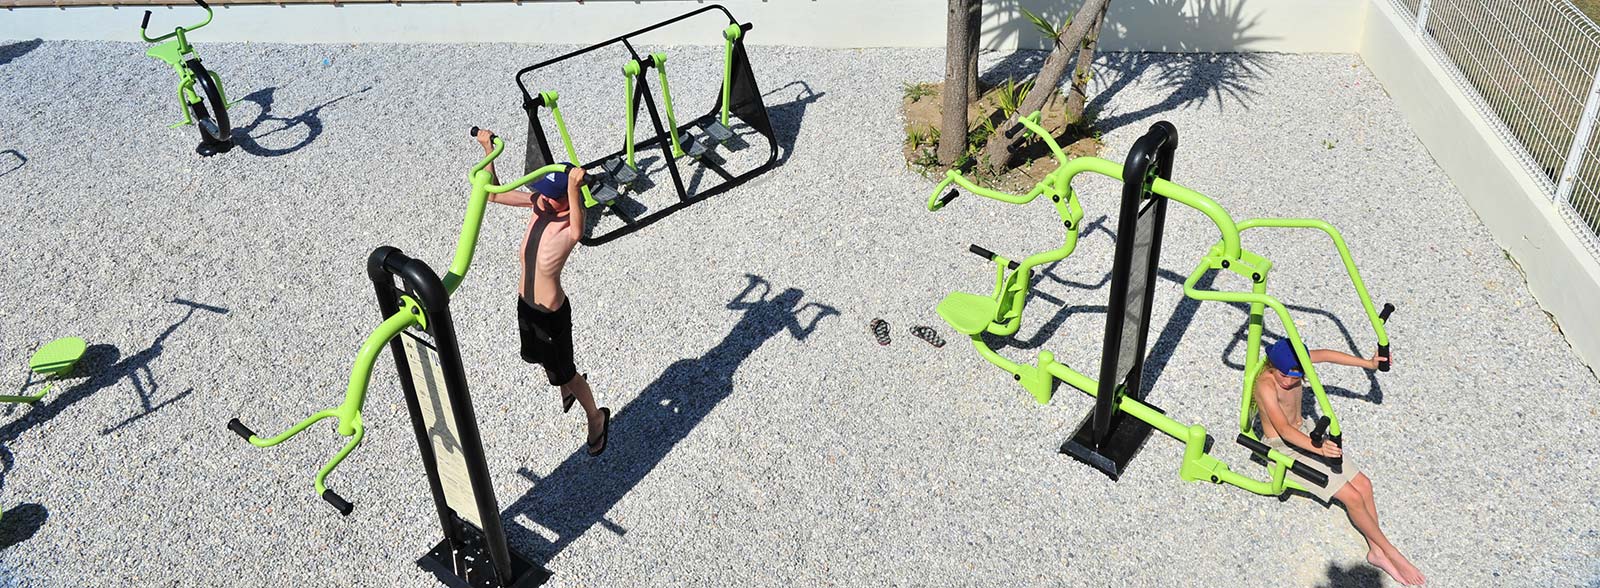 Outdoor fitness and bodybuilding equipment at the campsite in Oléron